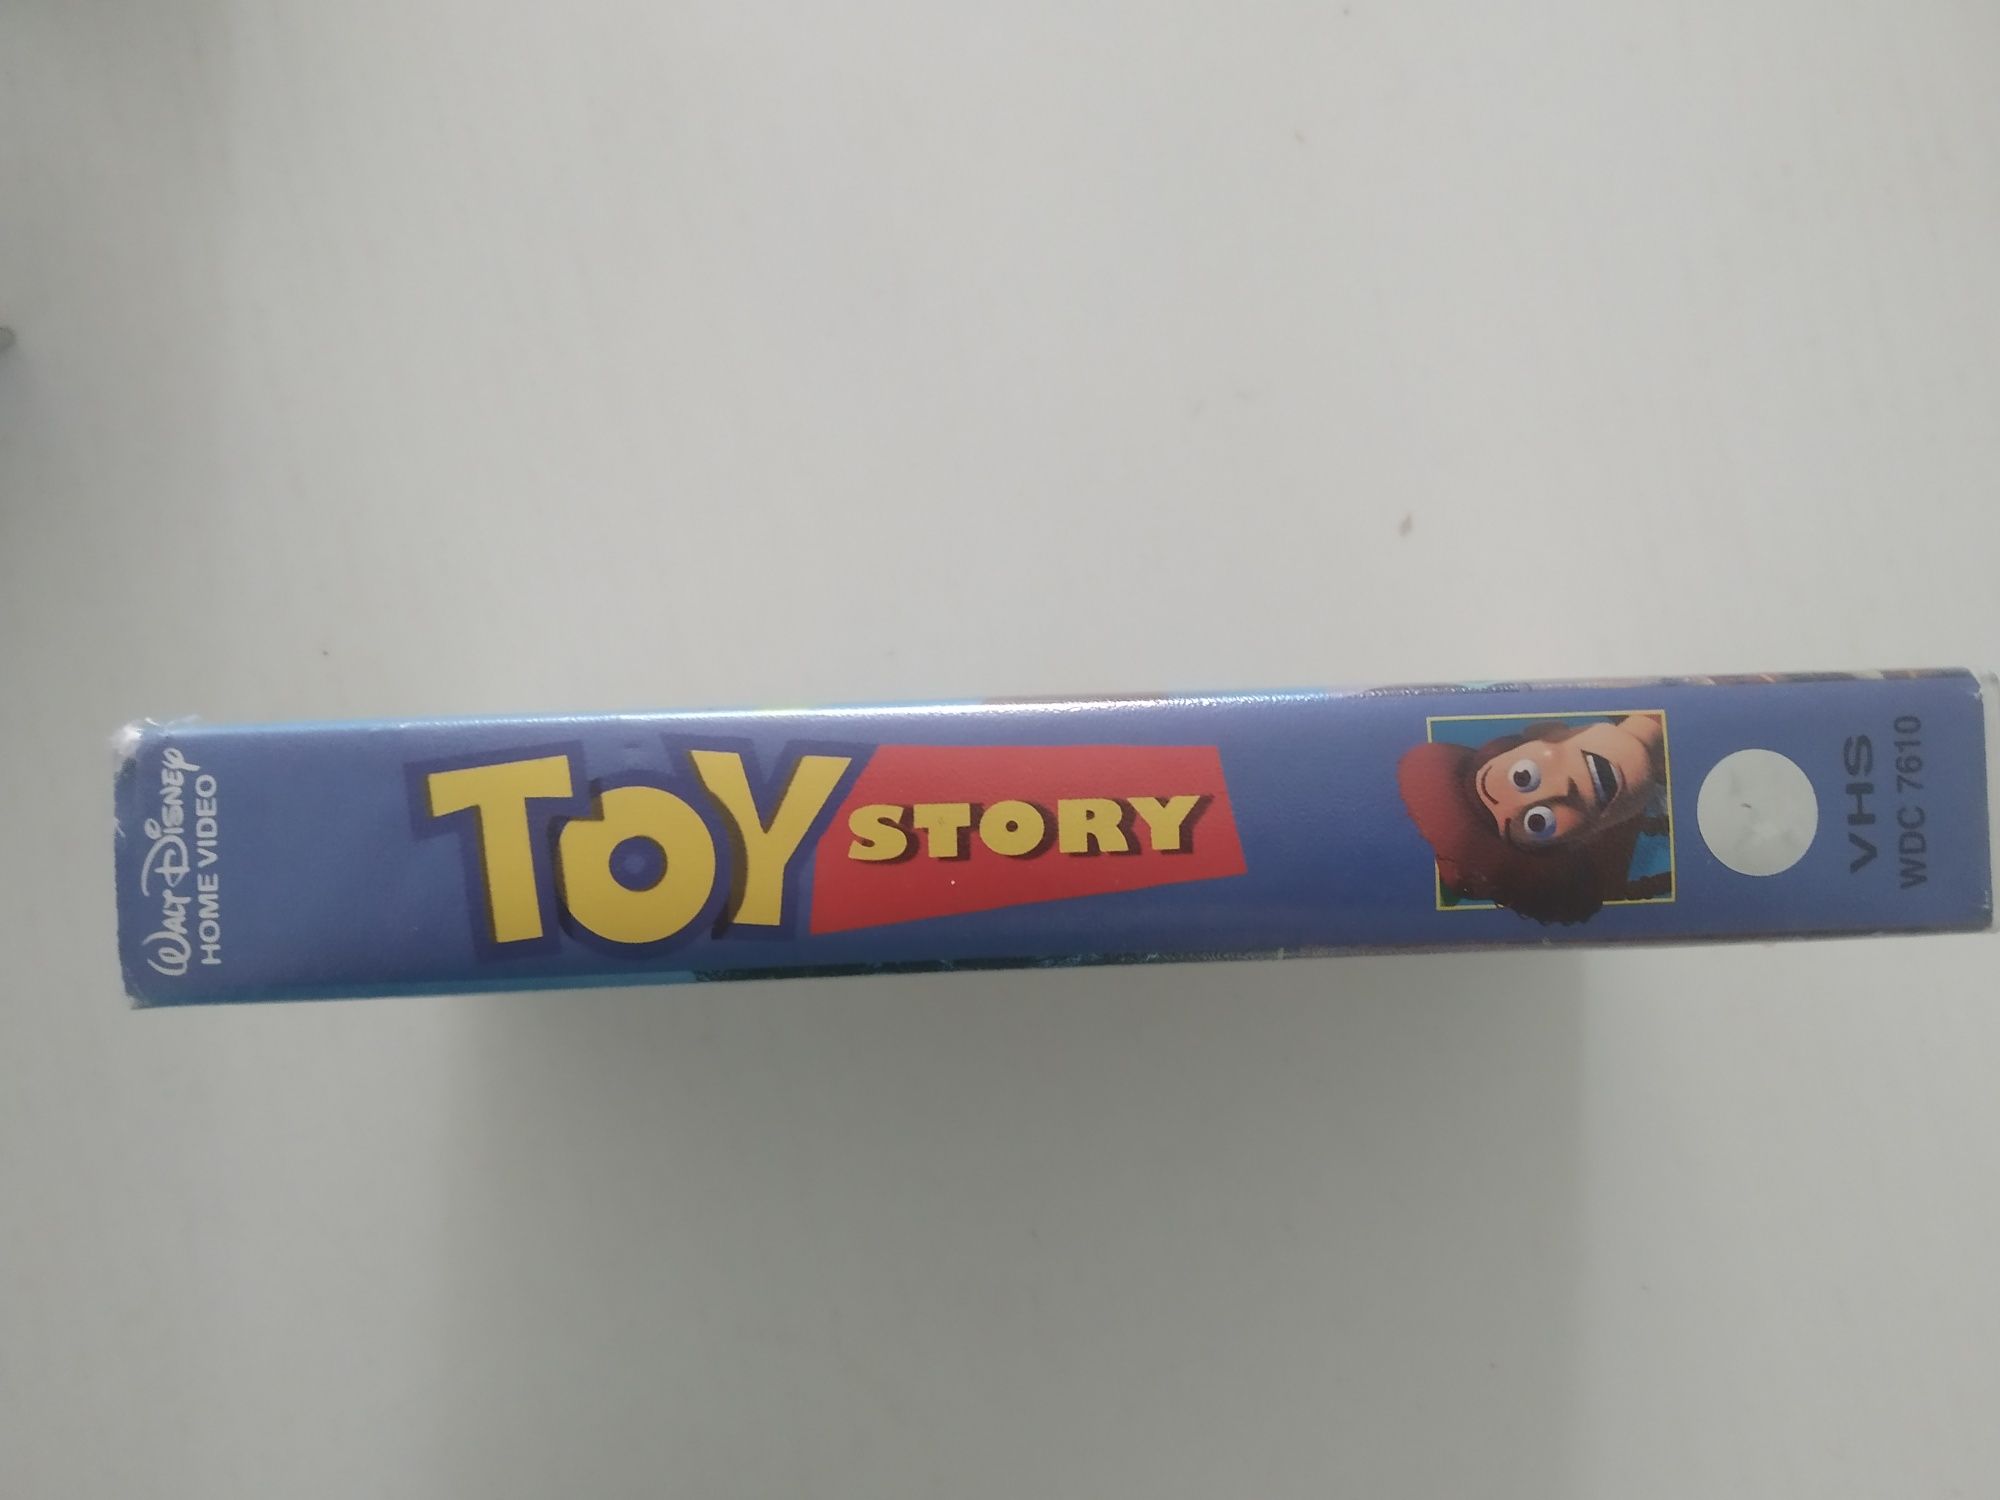 VHS  "Toy story"